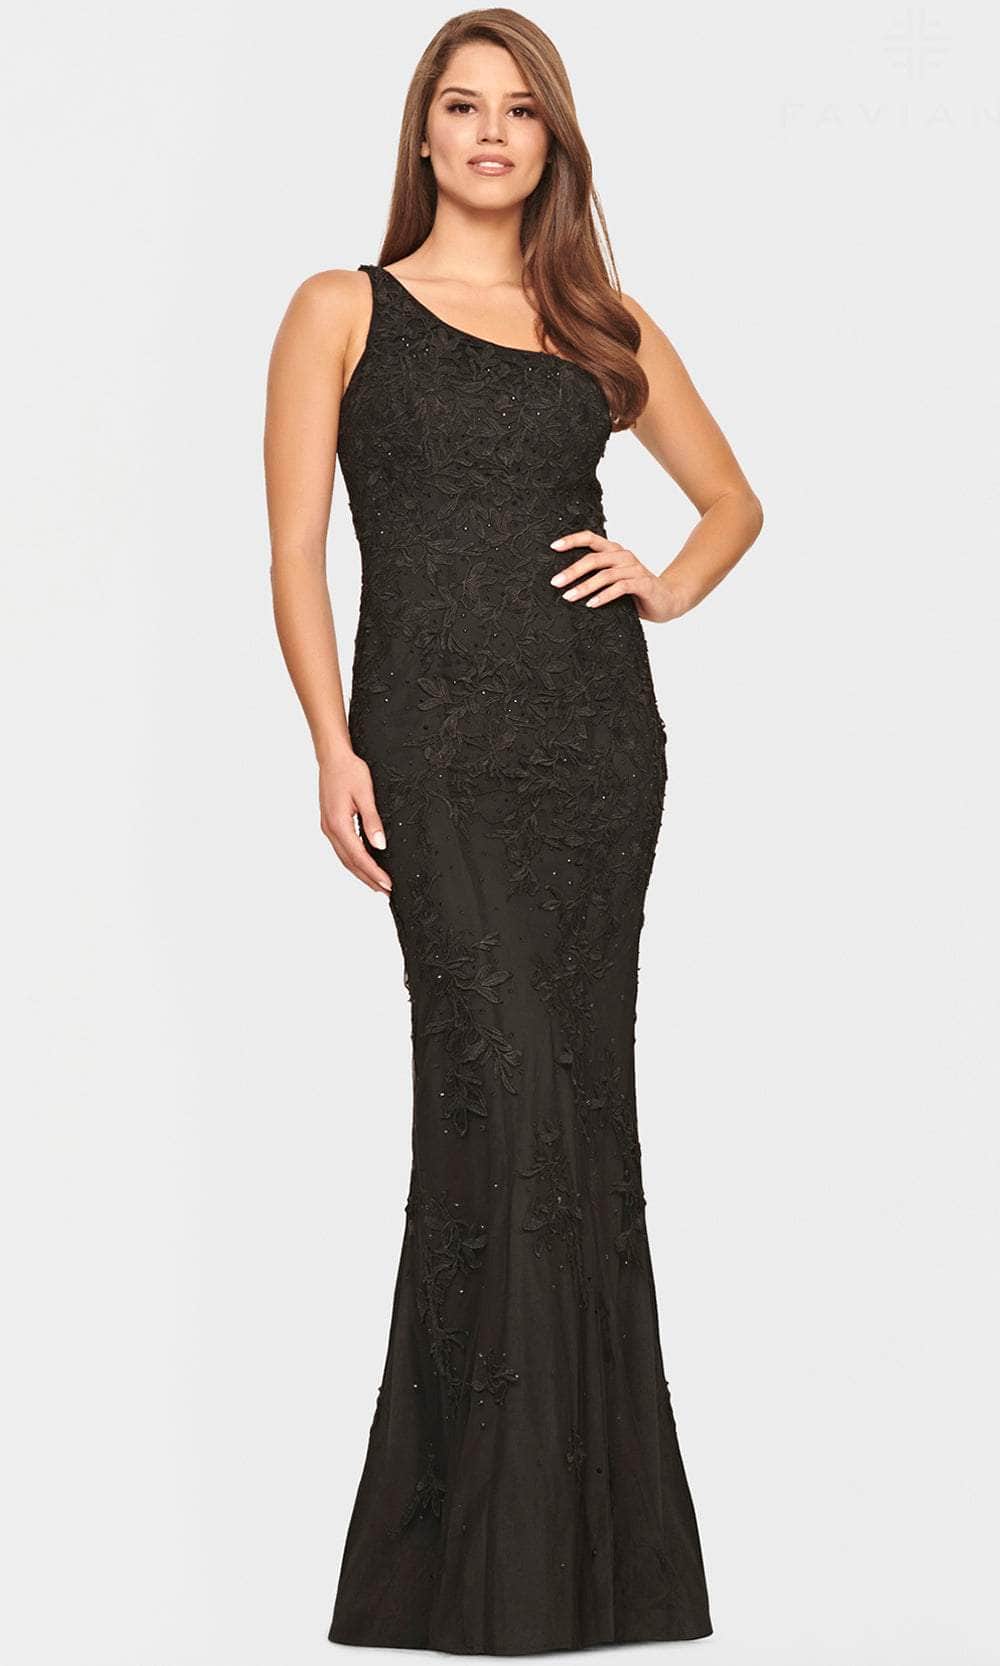 Image of Faviana S10822 - Asymmetric Lace Appliqued Prom Gown